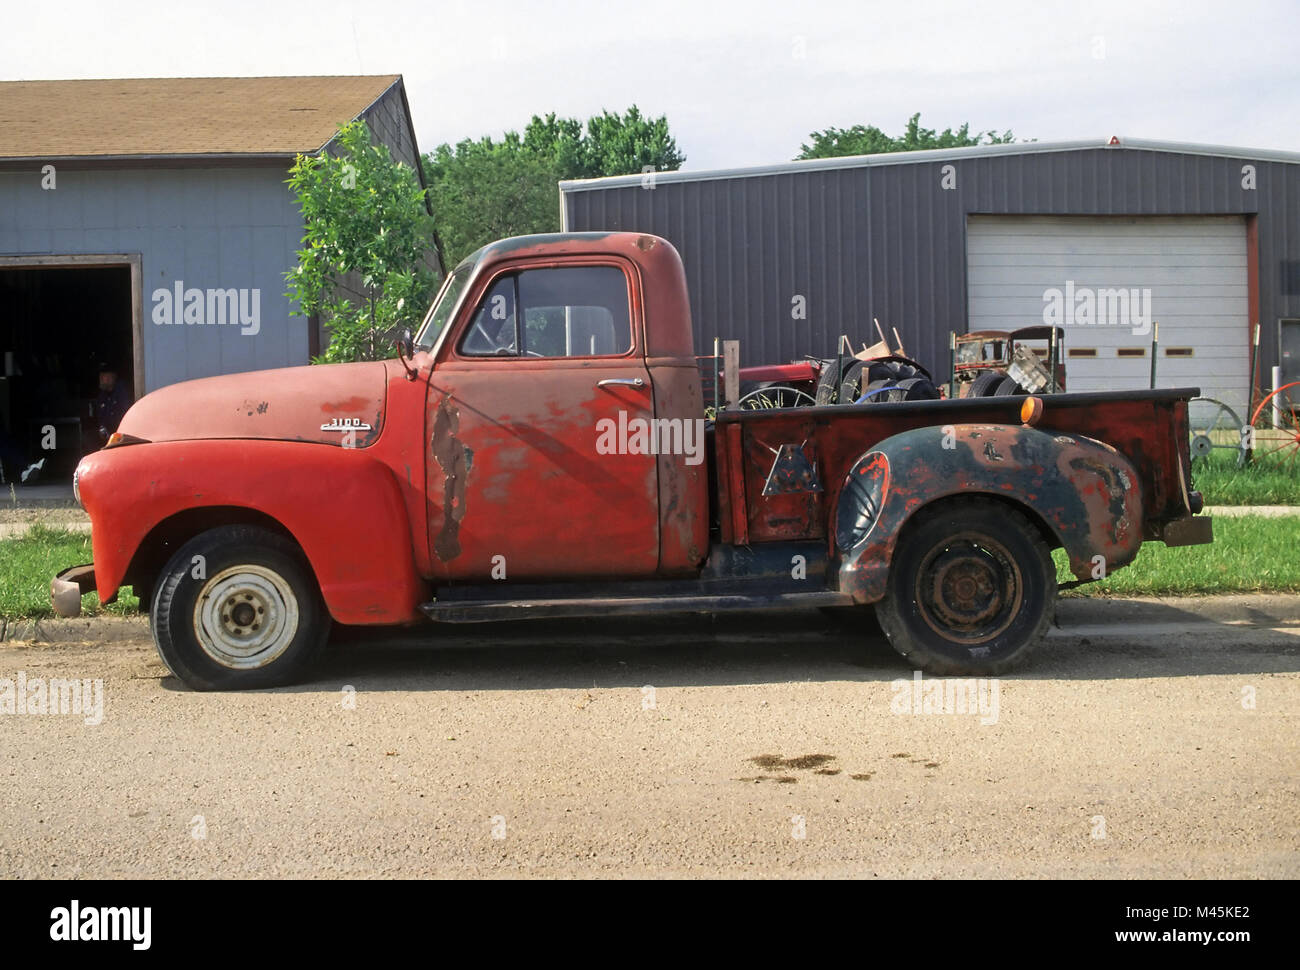 Hoyte, Kansas, USA - April 9, 2014: A battered red 1953 Chevy 3100 half-ton pickup truck in need of restoration parked on a rural road. Stock Photo